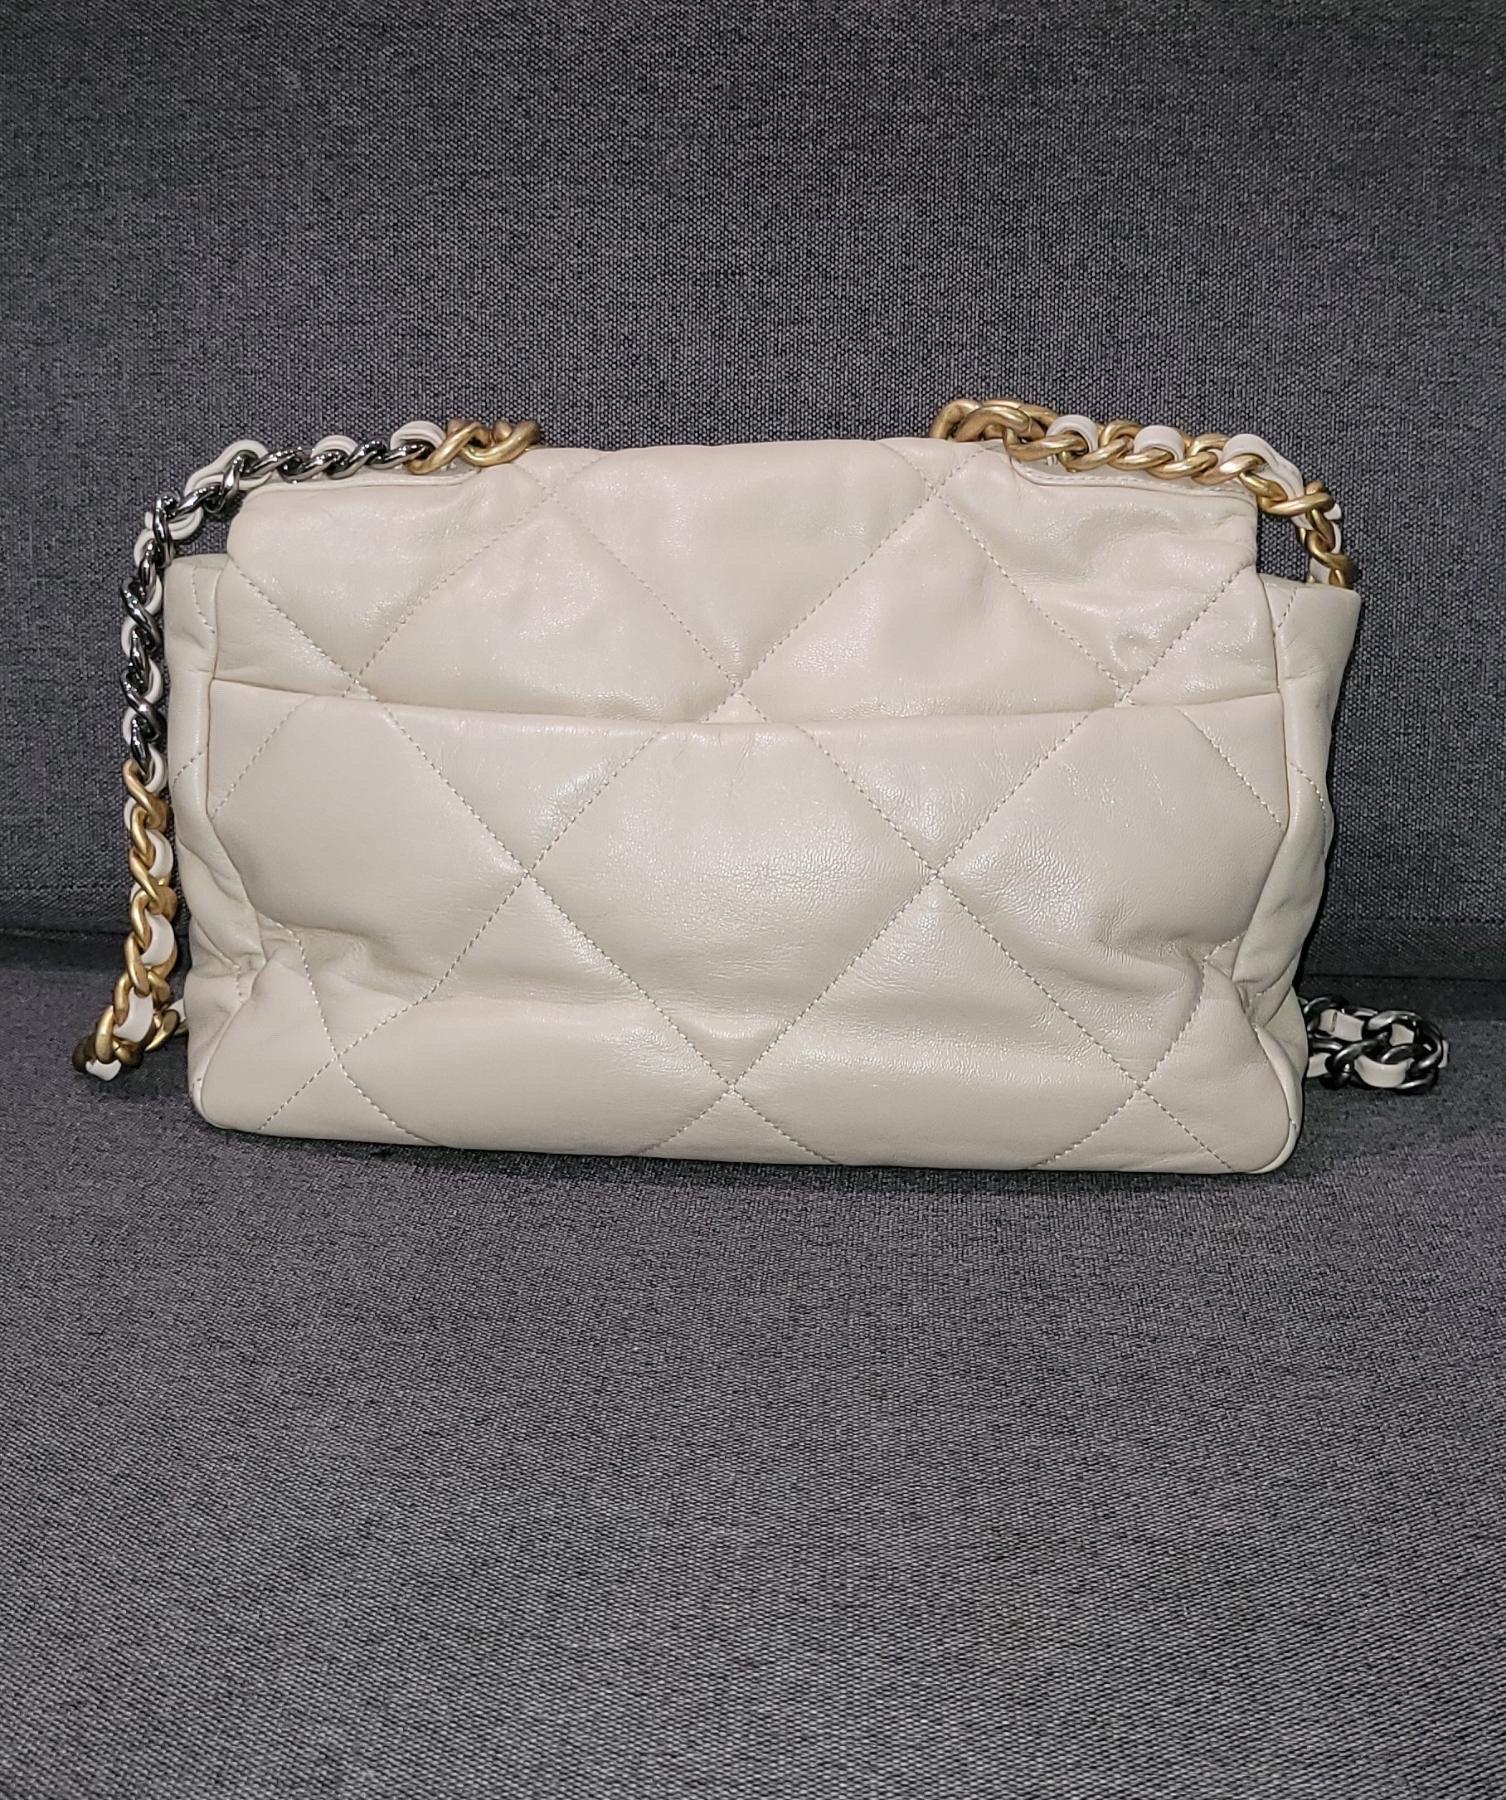 Chanel Beige Quilted Lambskin Large 19 Flap Bag Silver Hardware, 2020

    This bag was produced for the 2020
    The strap features silver, gold and ruthenium hardware
    The interior is lined with beige canvas



Height: 7.87 inches / 20